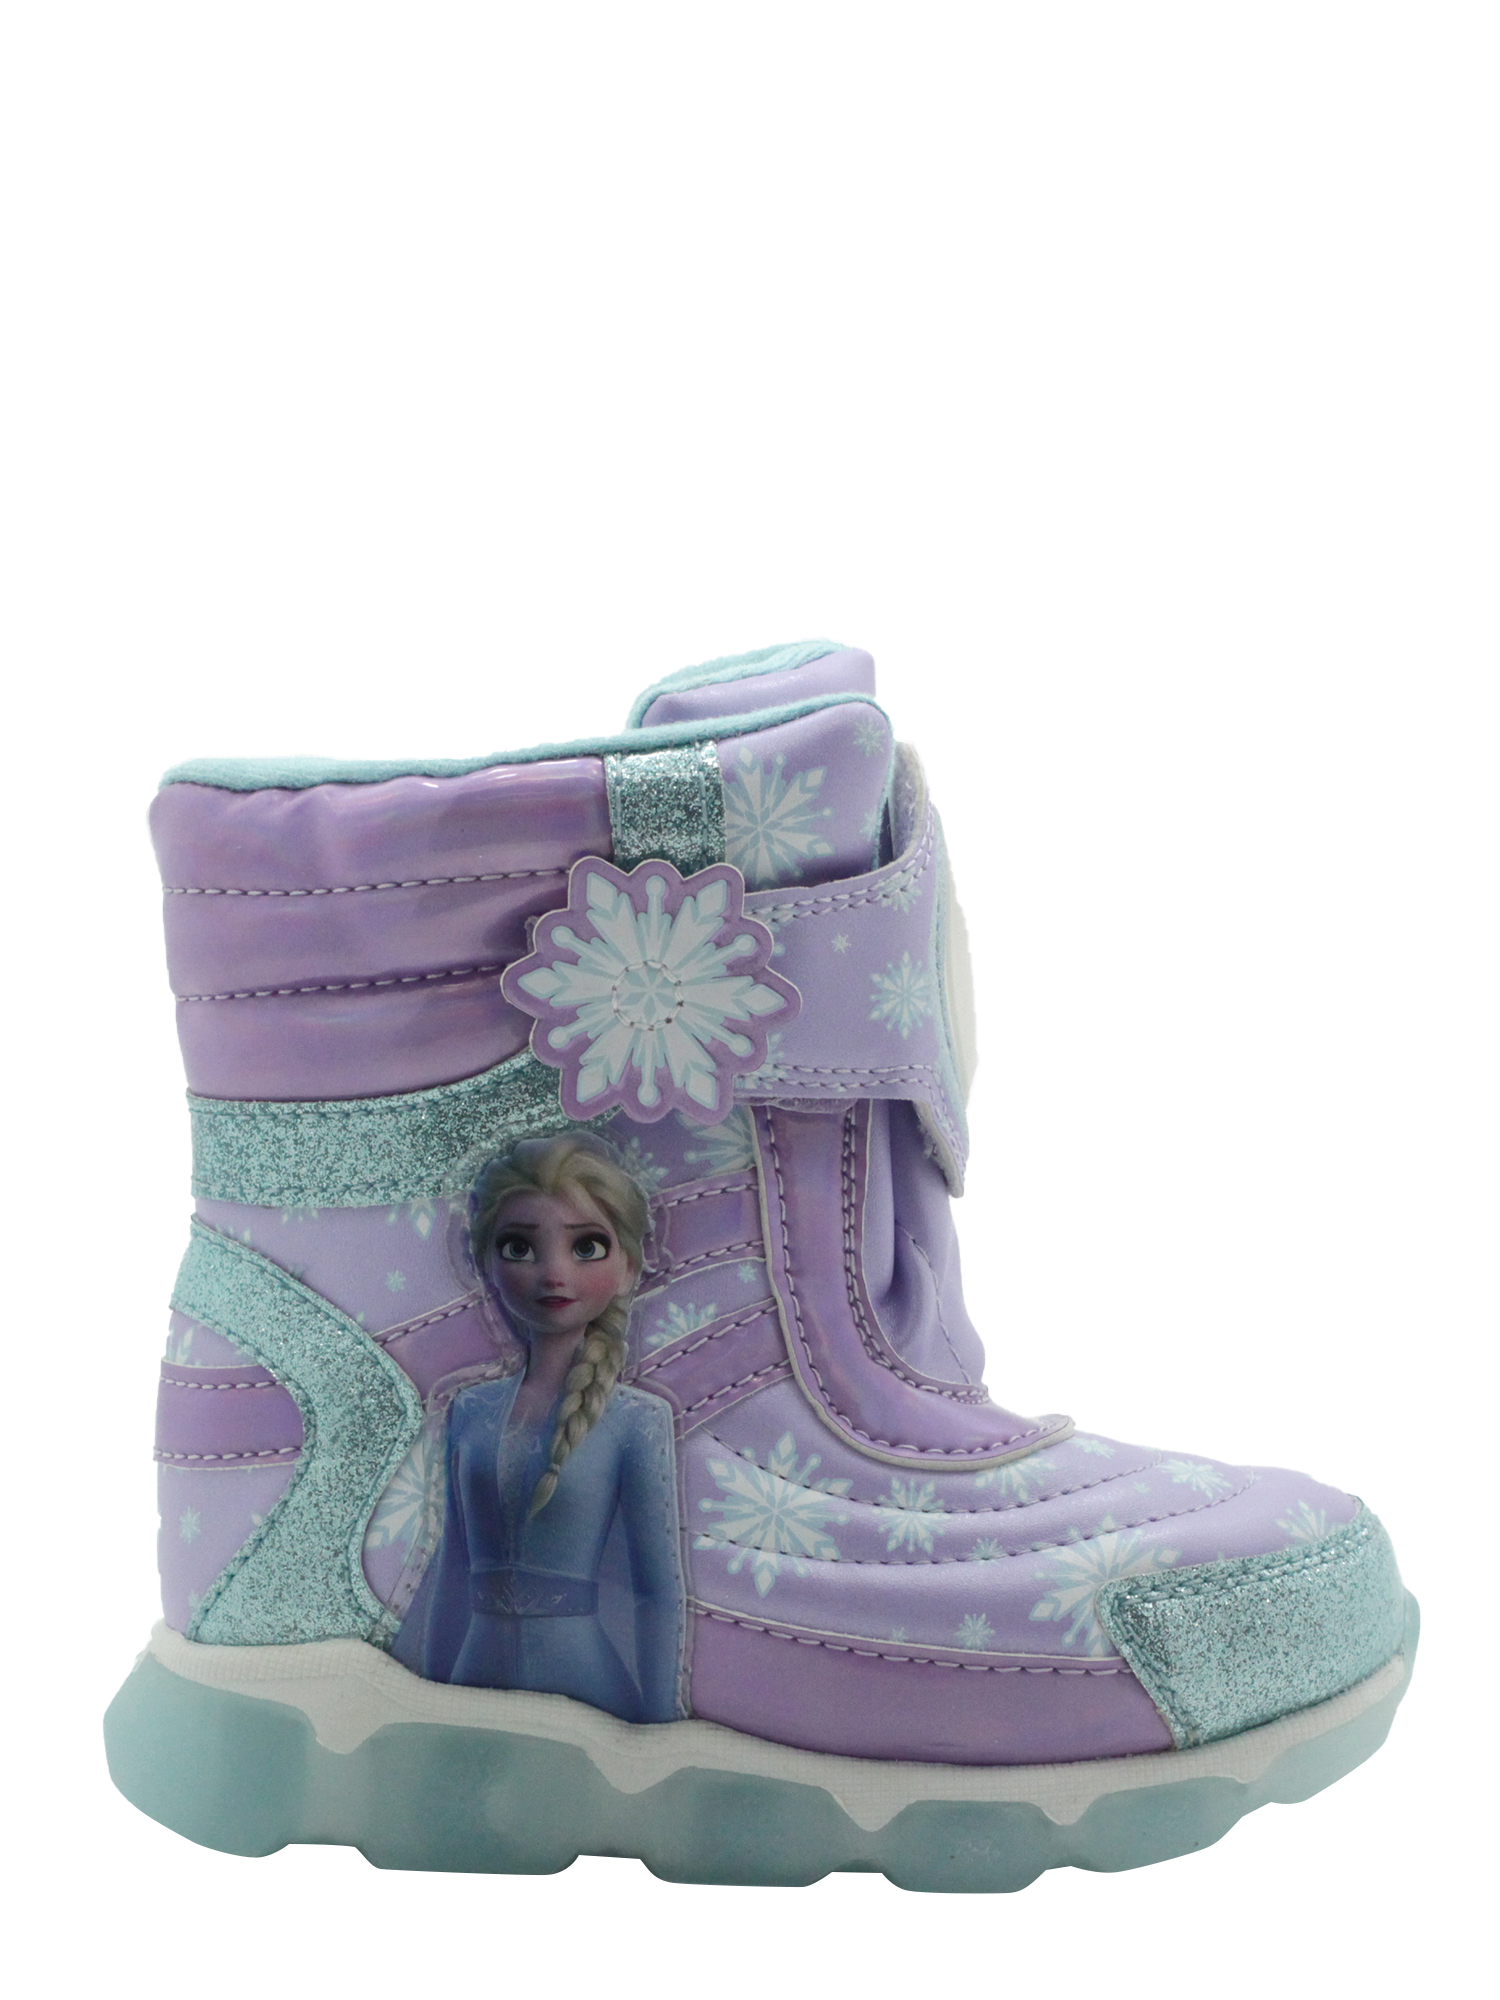 Disney Frozen 2 Bubble Snow Boot (Toddler Girls) - image 1 of 6